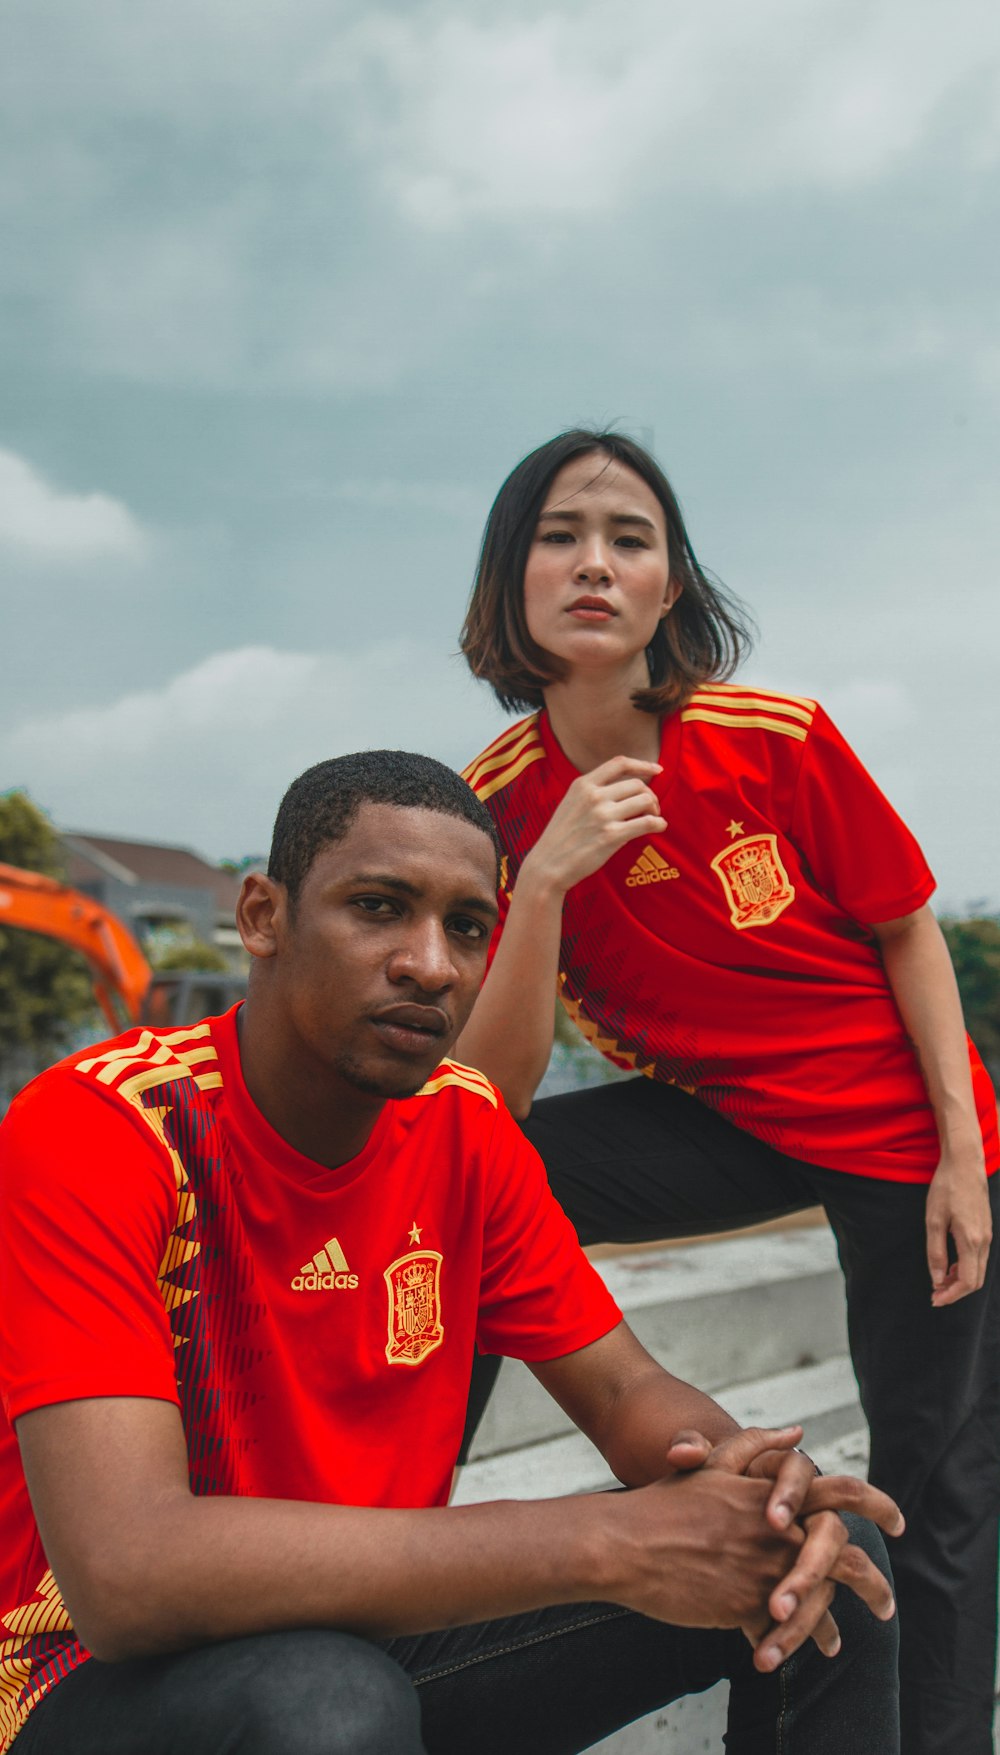 woman wearing red and yellow shirt beside man wearing red and yellow adidas shirts